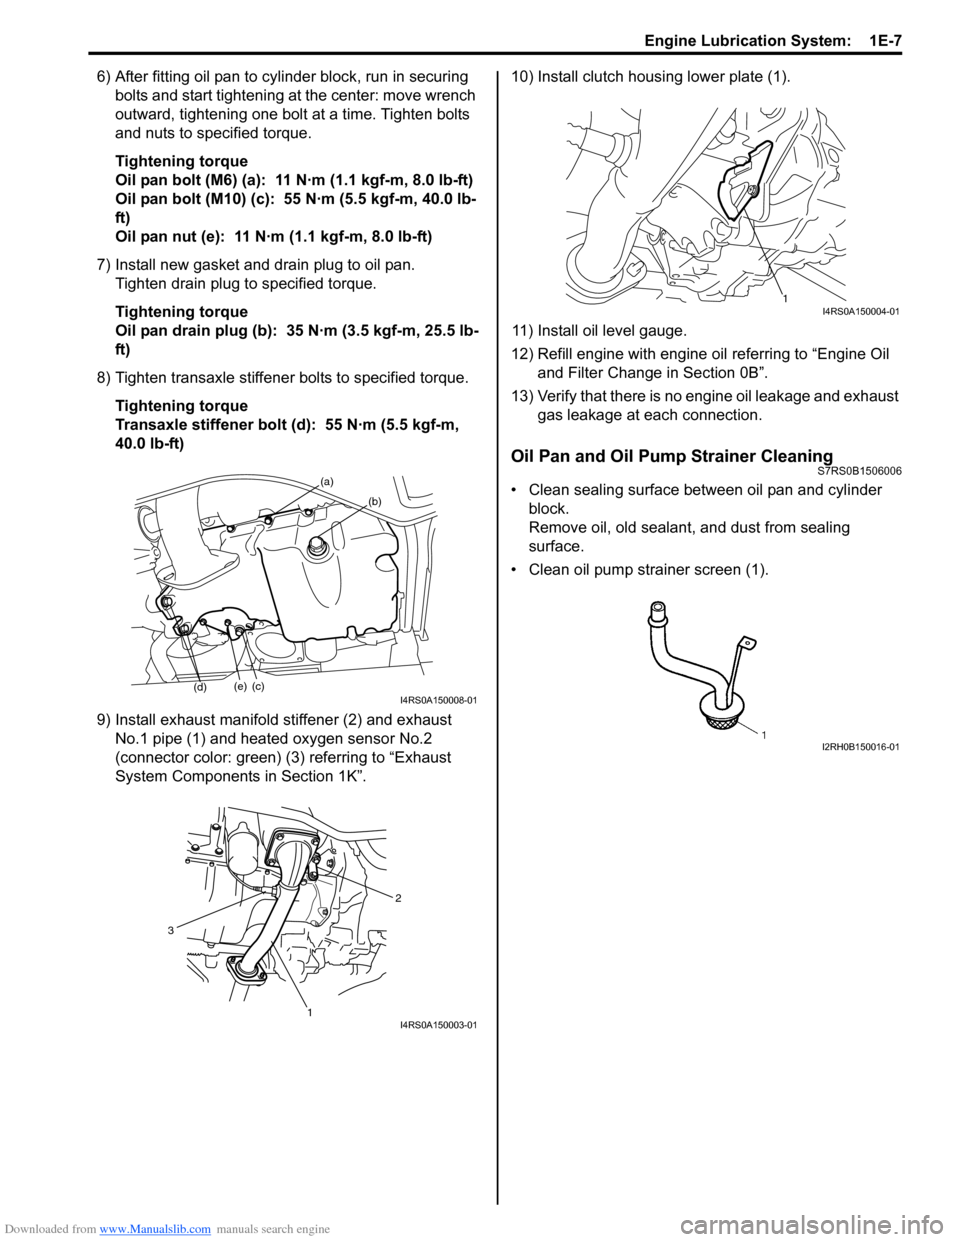 SUZUKI SWIFT 2008 2.G Service Owners Manual Downloaded from www.Manualslib.com manuals search engine Engine Lubrication System:  1E-7
6) After fitting oil pan to cylinder block, run in securing bolts and start tightening at the center: move wre